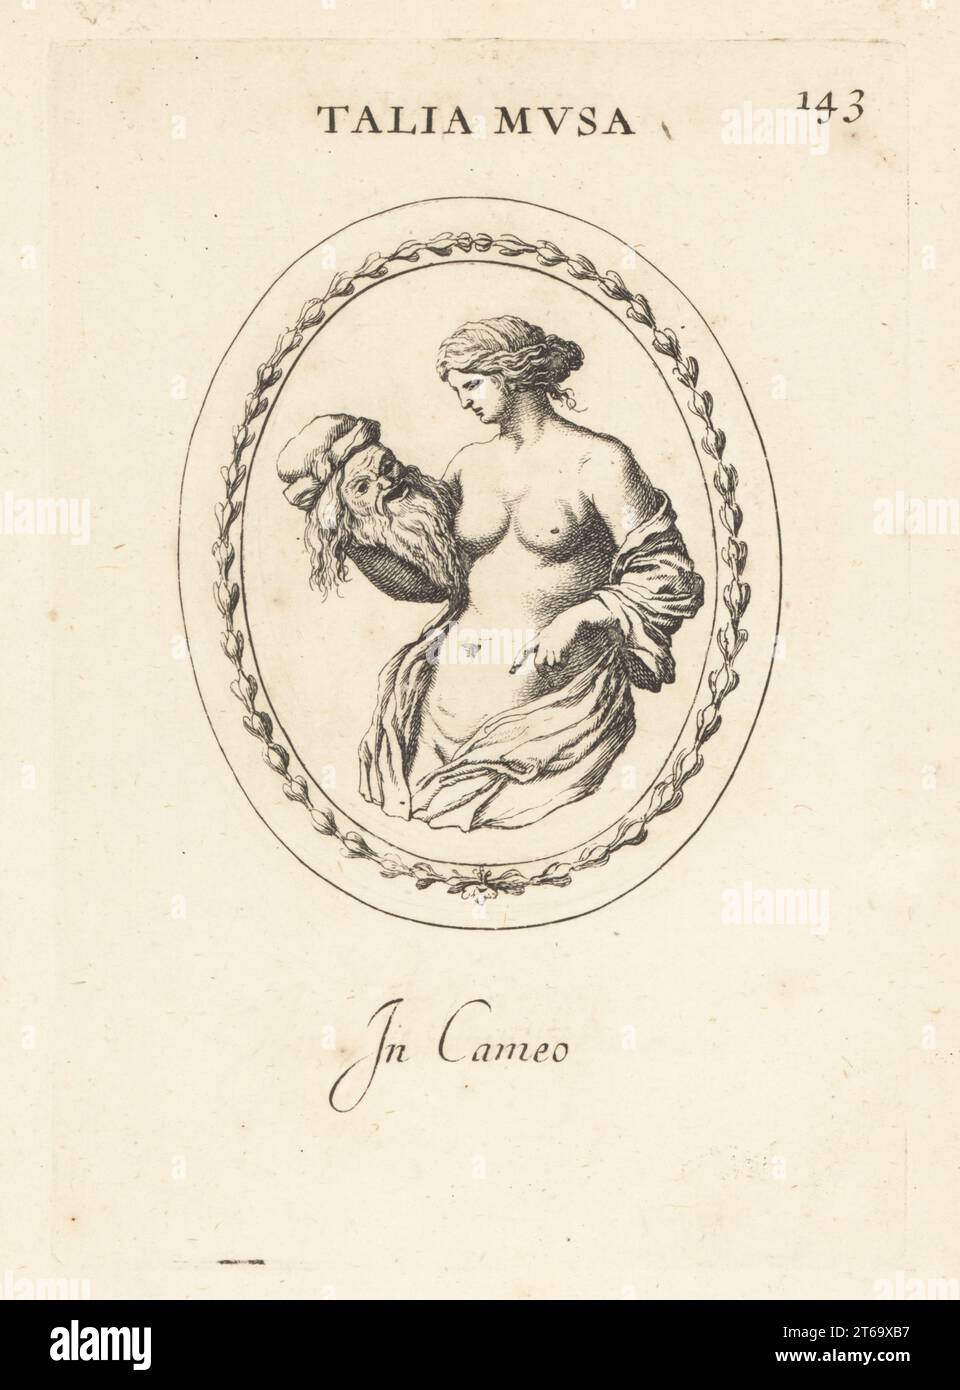 Figure of Thalia, the Greek muse of comedy and idyllic poetry, with a comic mask. Talia Musa. In cameo. Copperplate engraving by Giovanni Battista Galestruzzi after Leonardo Agostini from Gemmae et Sculpturae Antiquae Depicti ab Leonardo Augustino Senesi, Abraham Blooteling, Amsterdam, 1685. Stock Photo